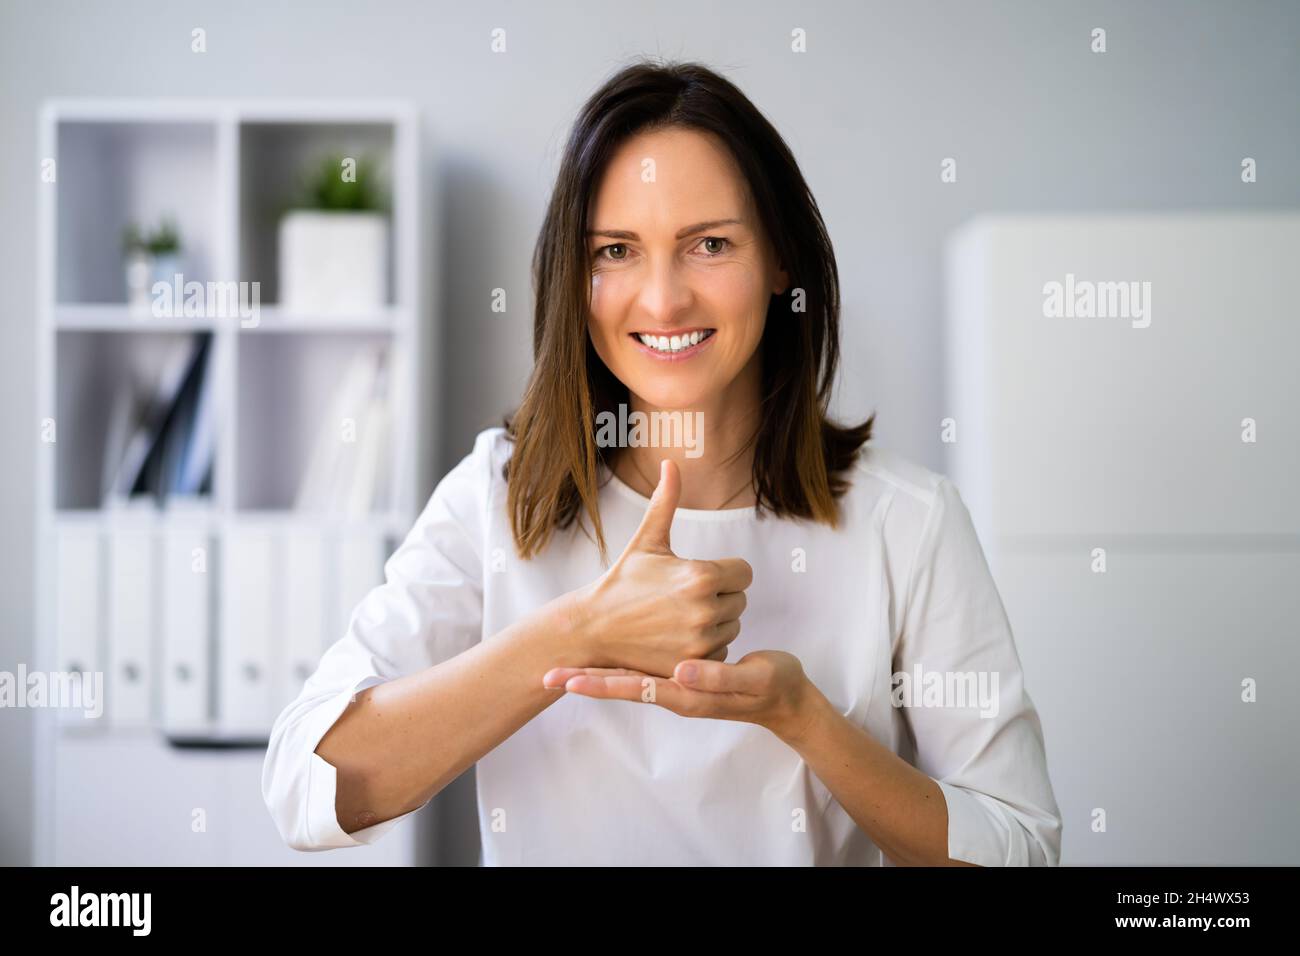 Learning Disability Sign Language For Deaf People Stock Photo